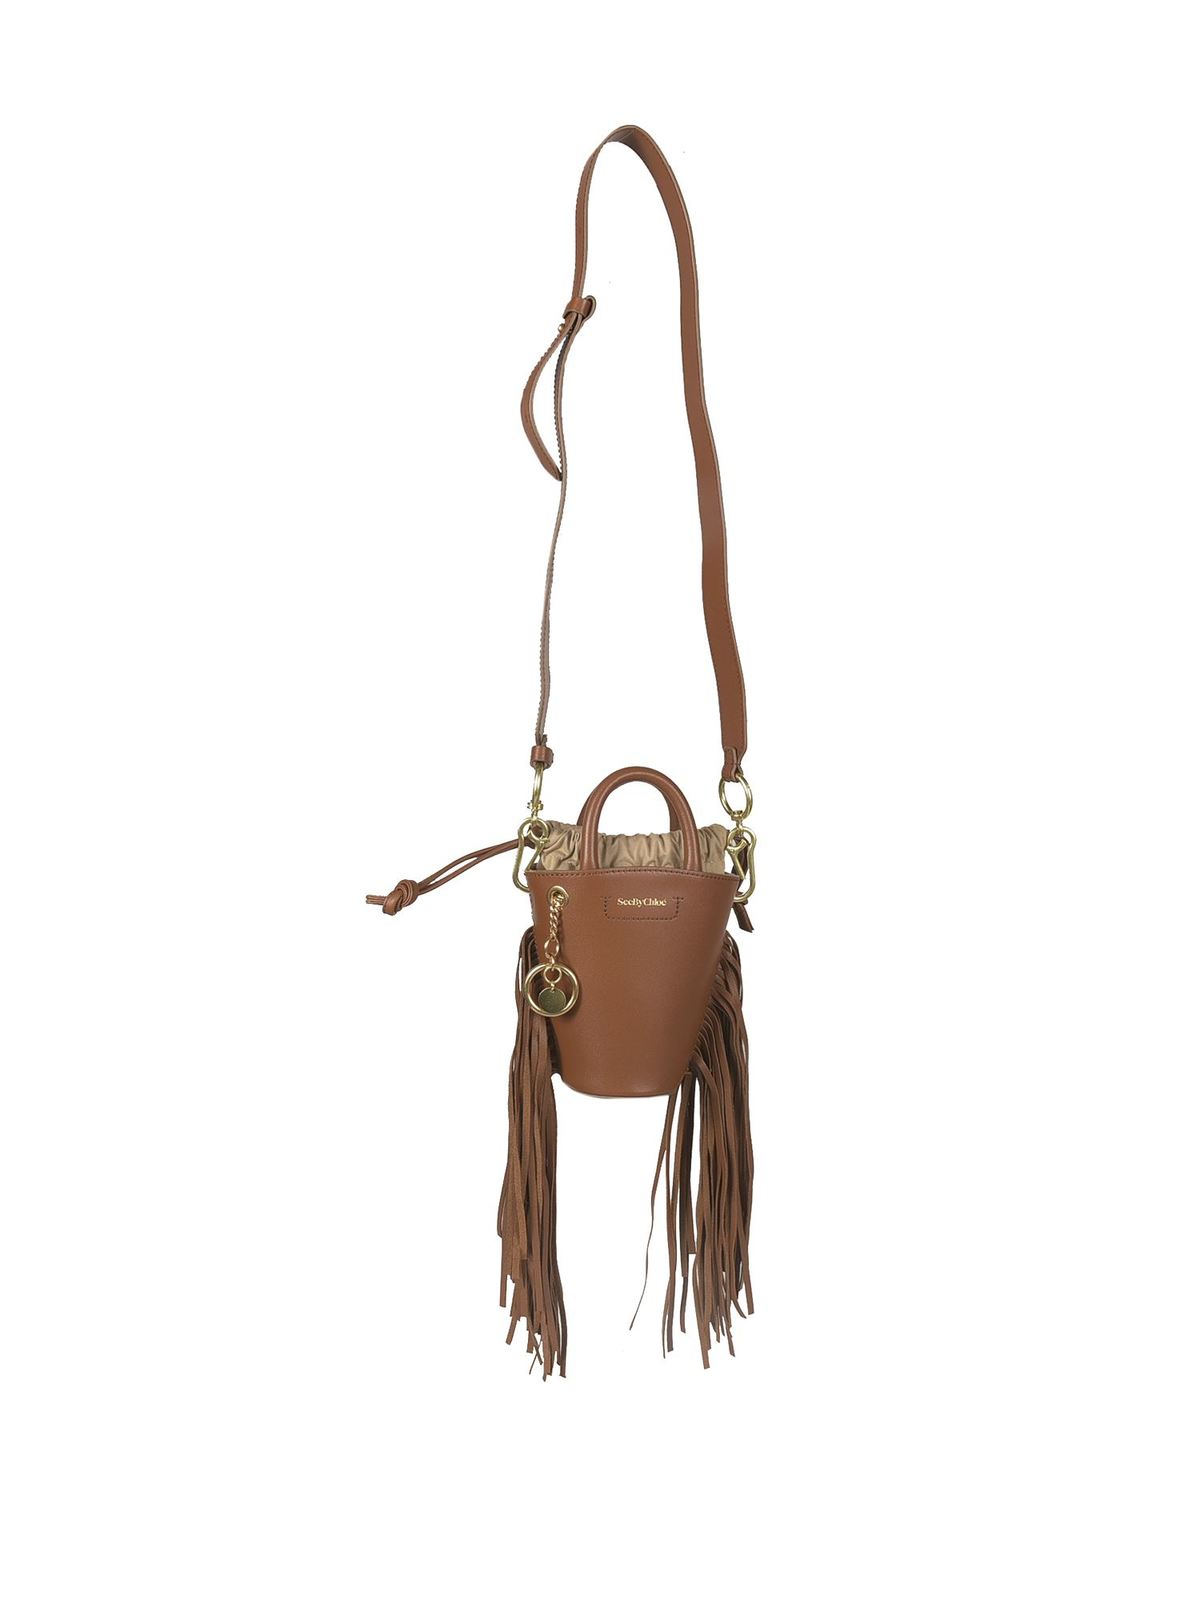 SEE BY CHLOÉ FRINGED MINI CECILYA BAG IN CARAMELLO COLOR